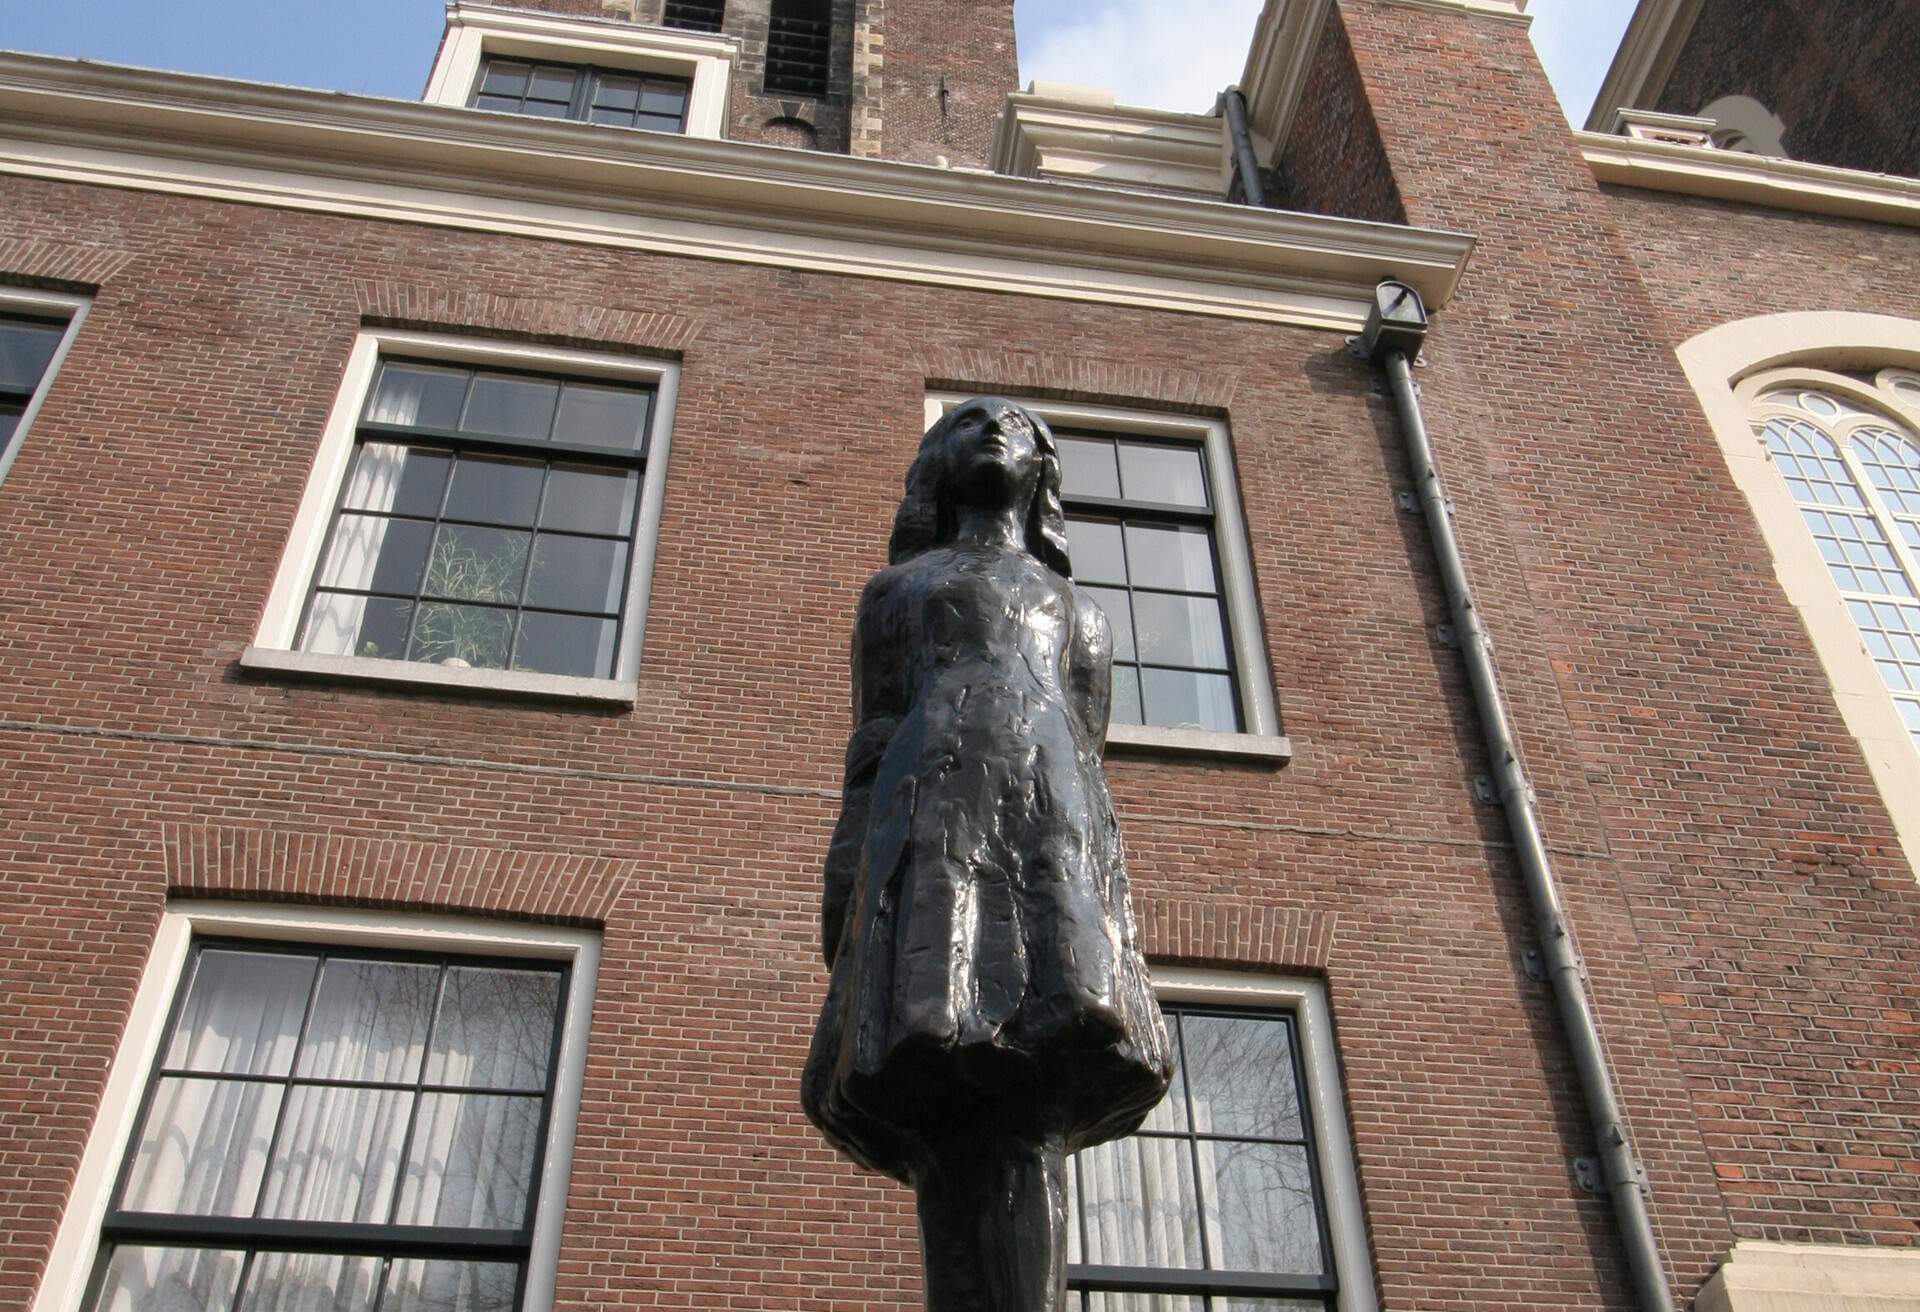 The statue of Anne Frank is displayed in front of the Anne Frank House building in Amsterdam, Netherlands.